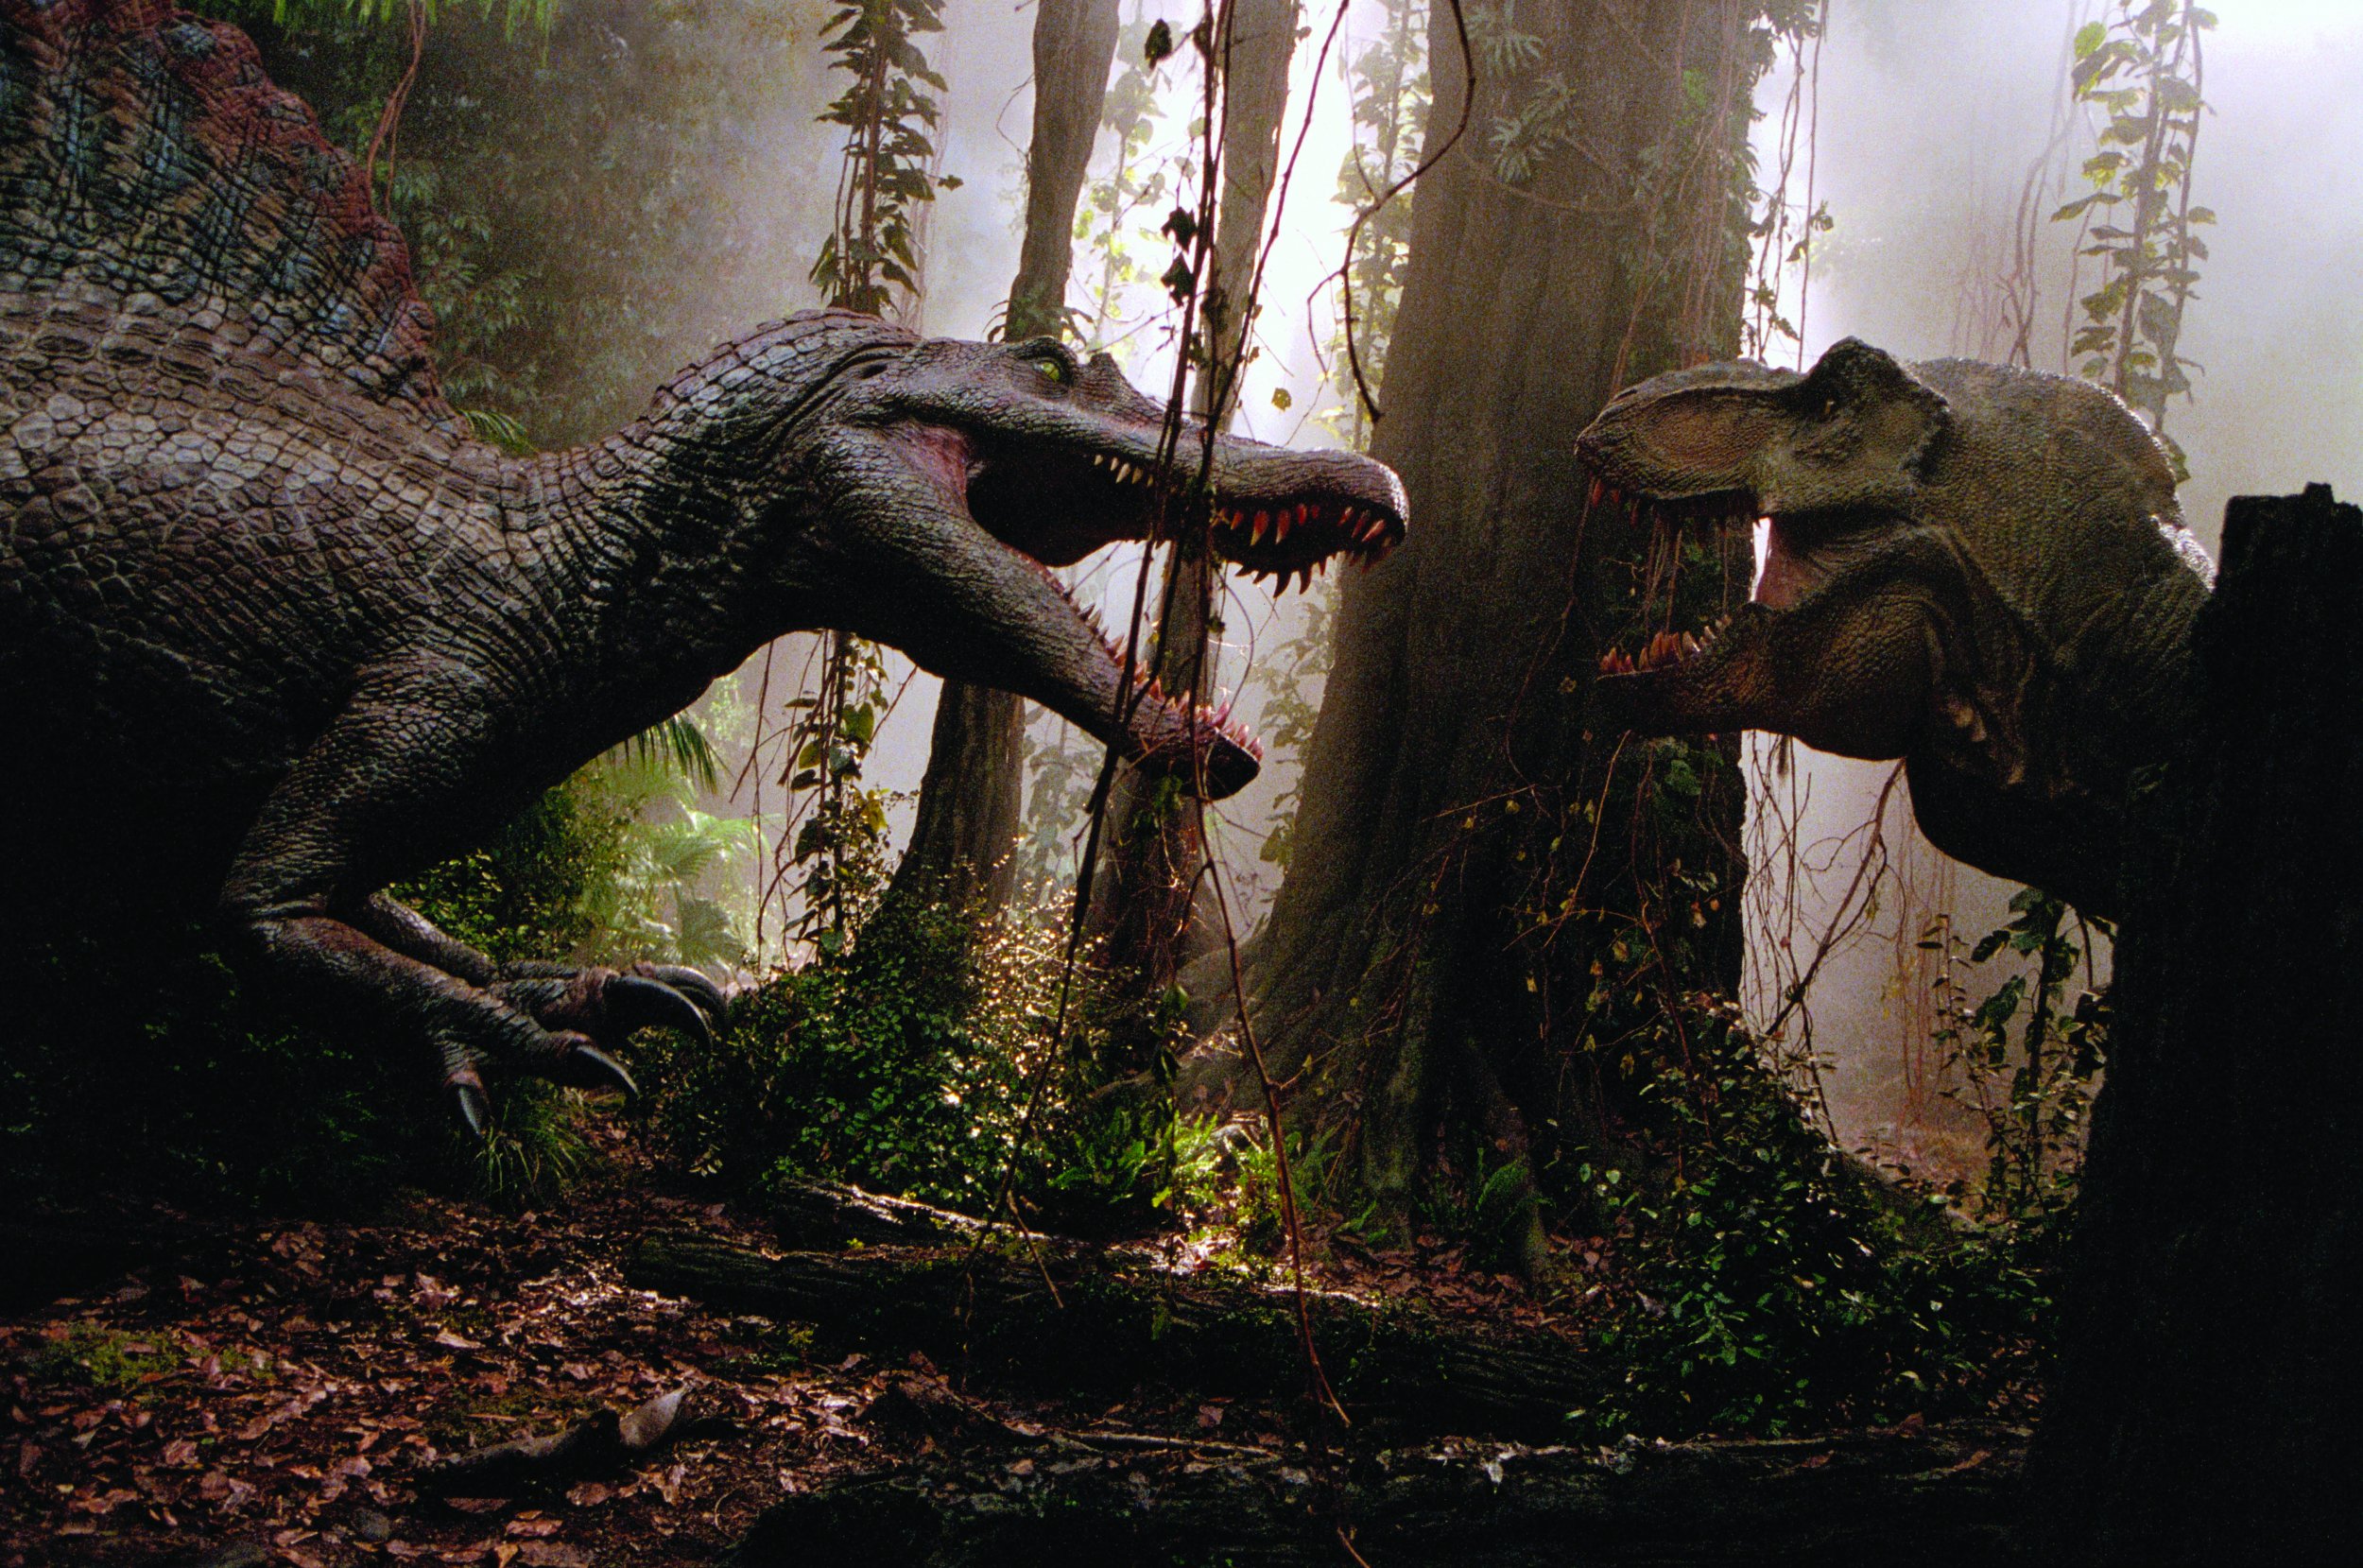 The Dino-Sized Scientific Issues Behind 'Jurassic Park'